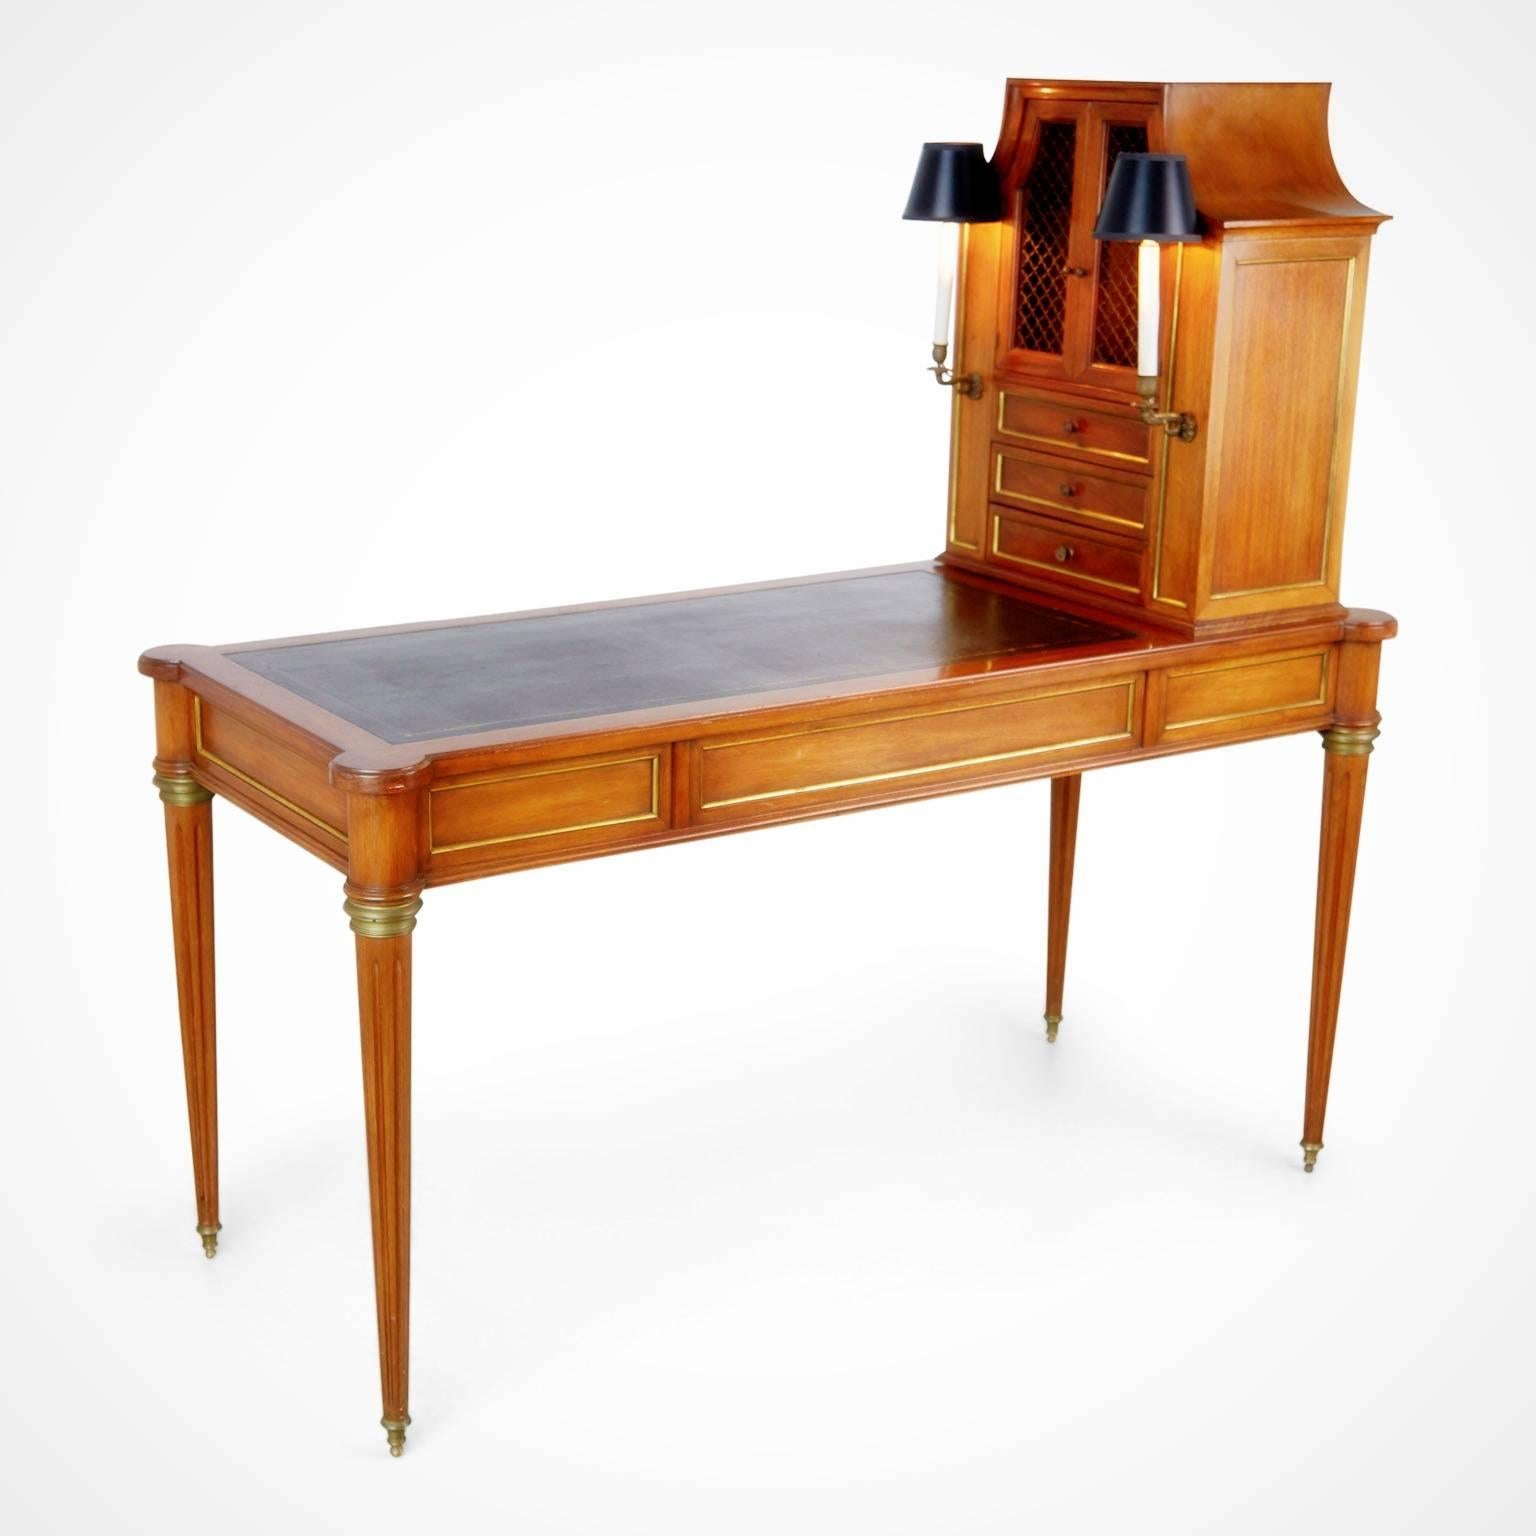 Beautifully detailed Louis XVI style bureau plat desk with side cabinet by Maison Jansen. Fabricated from walnut with reeded legs, embossed tooled black leather writing top and turret corners. This elegant desk also has three slim drawers on one